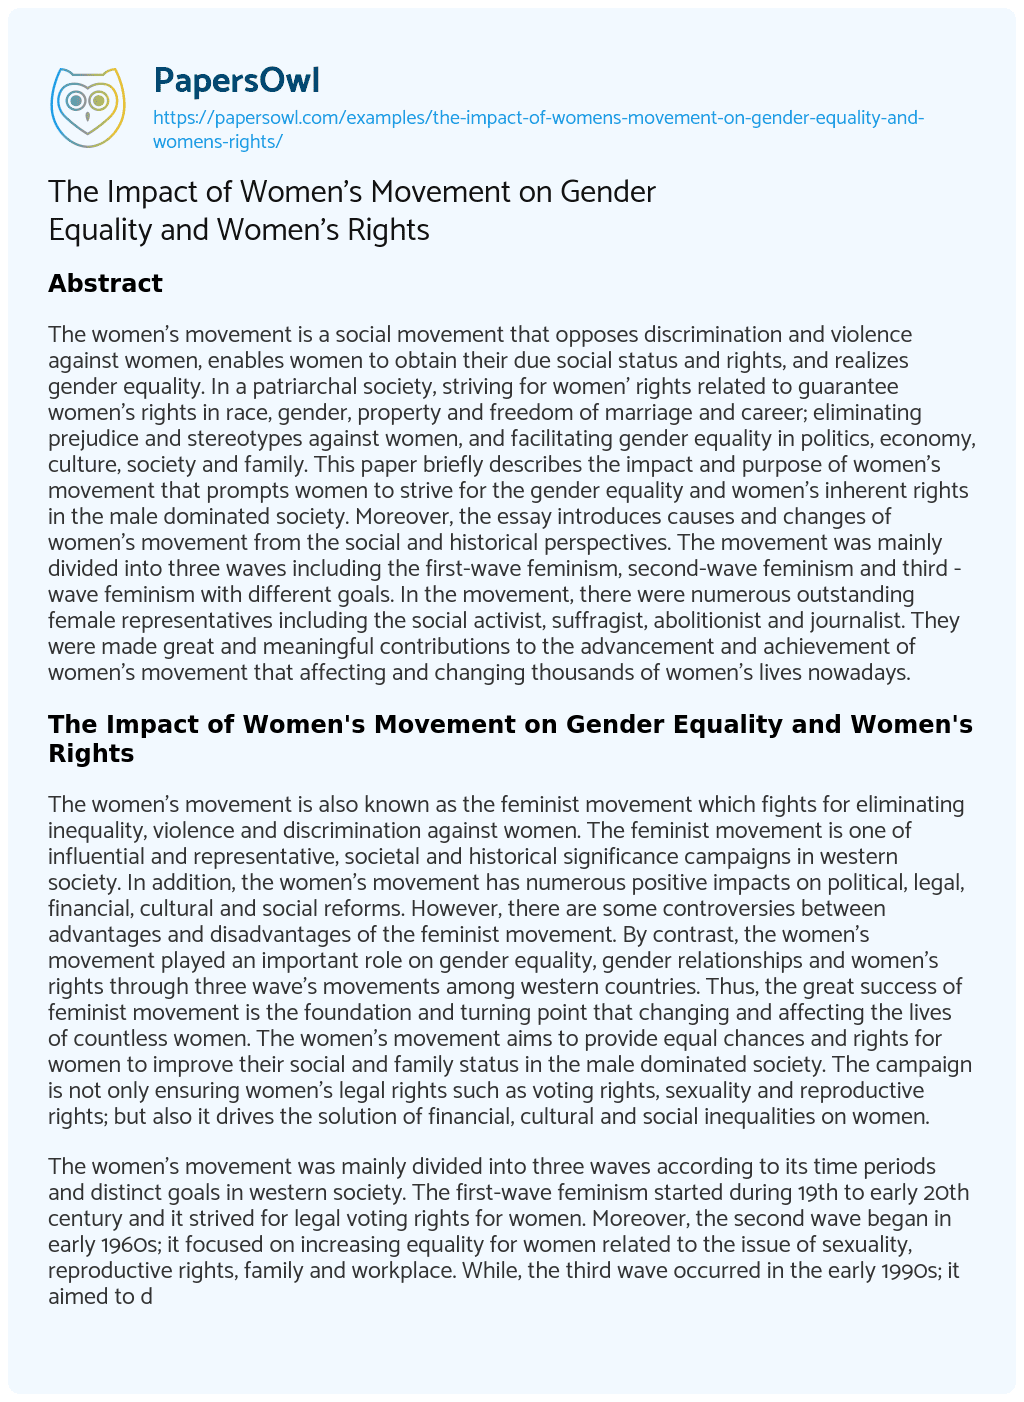 Essay on The Impact of Women’s Movement on Gender Equality and Women’s Rights